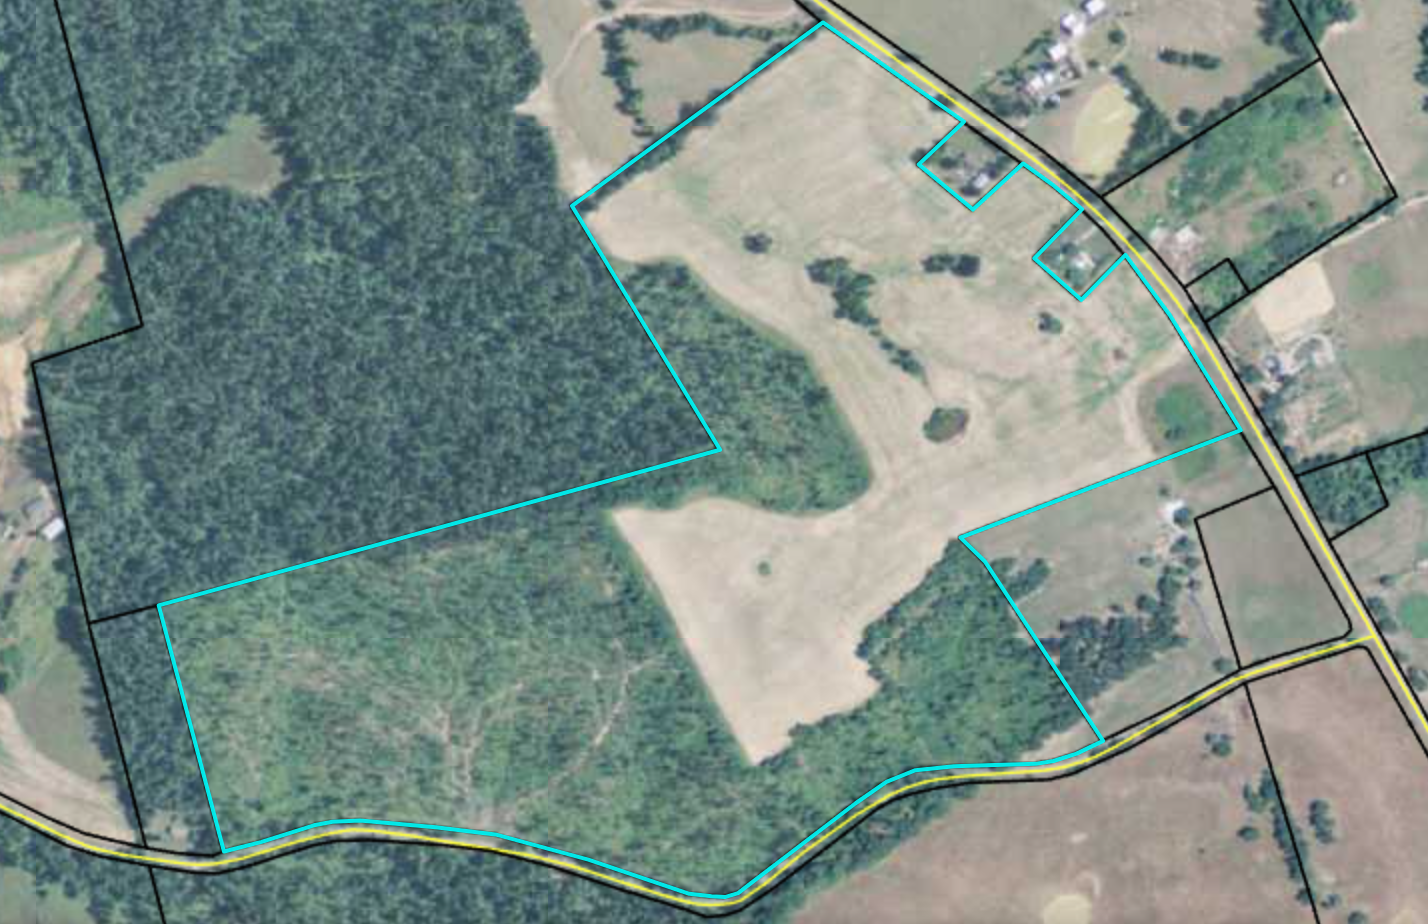 120 ACRES: LOCATED IN LYON CO KY, $480,000